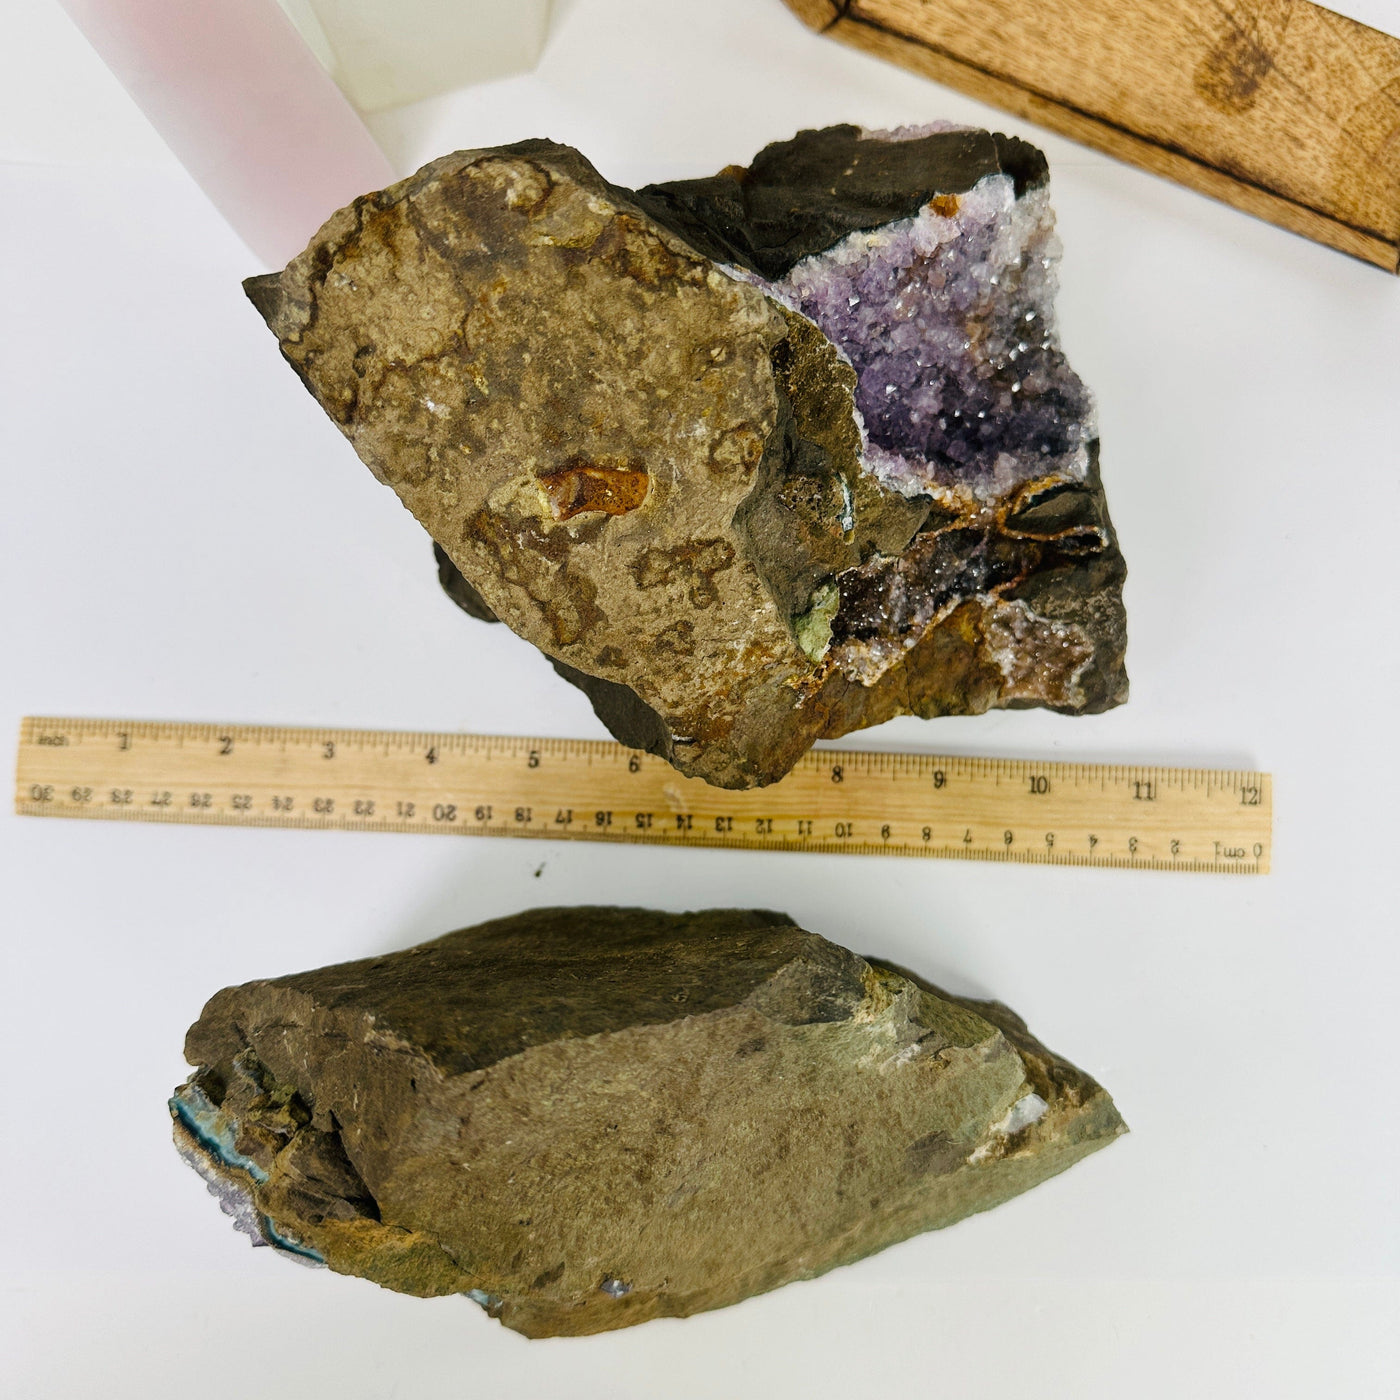 amethyst on matrix next to a ruler for size reference